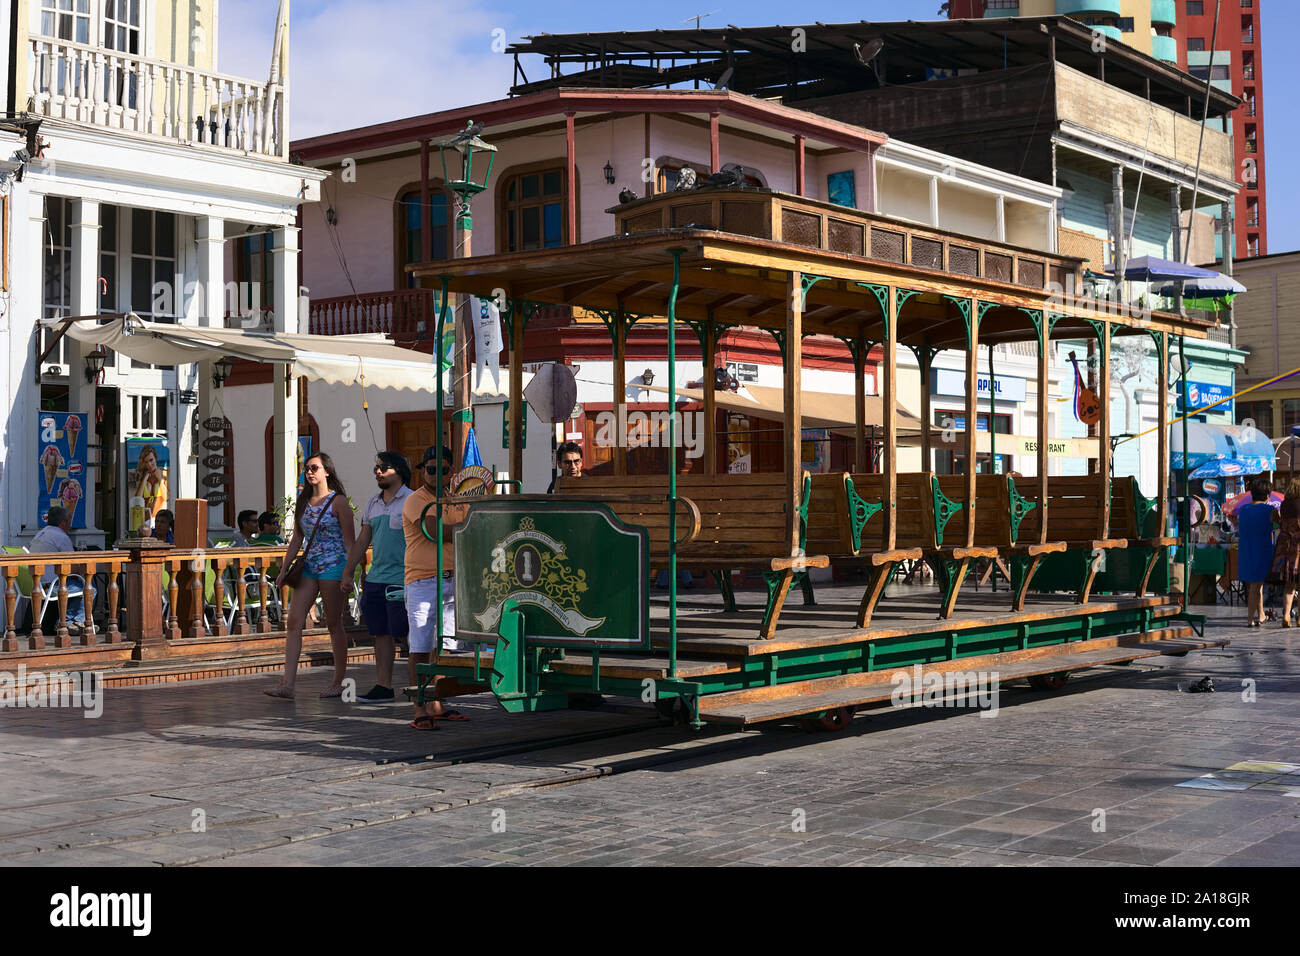 IQUIQUE, CHILE - JANUARY 22, 2015: Unidentified people around an old open tram waggon with wooden seats on Plaza Prat main square in Iquique, Chile Stock Photo